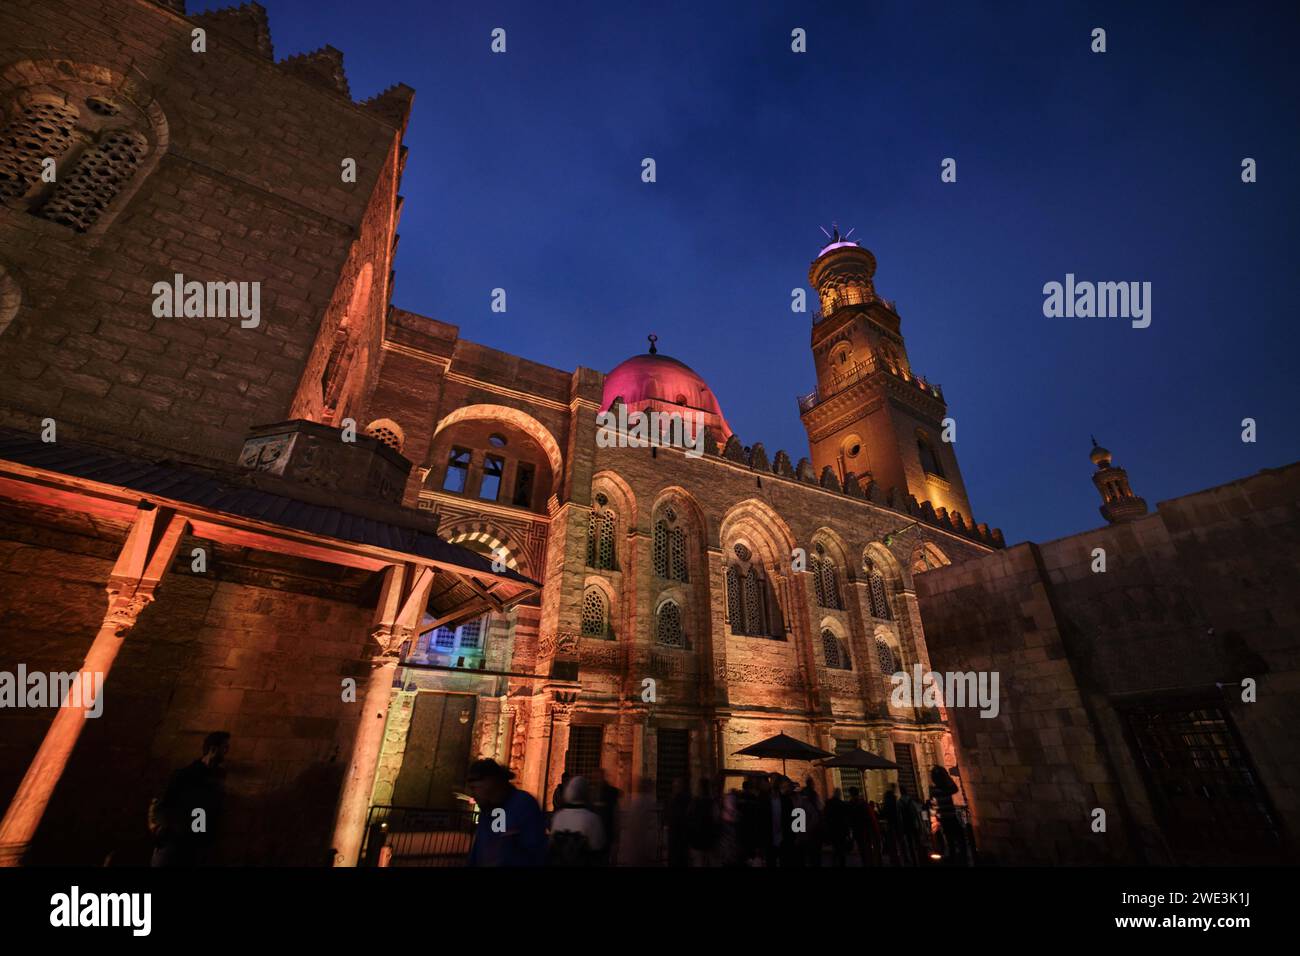 Cairo, Egypt - December 24 2023: The Qalawun complex is a massive pious complex in Al-Muizz Street,  Old Cairo Stock Photo